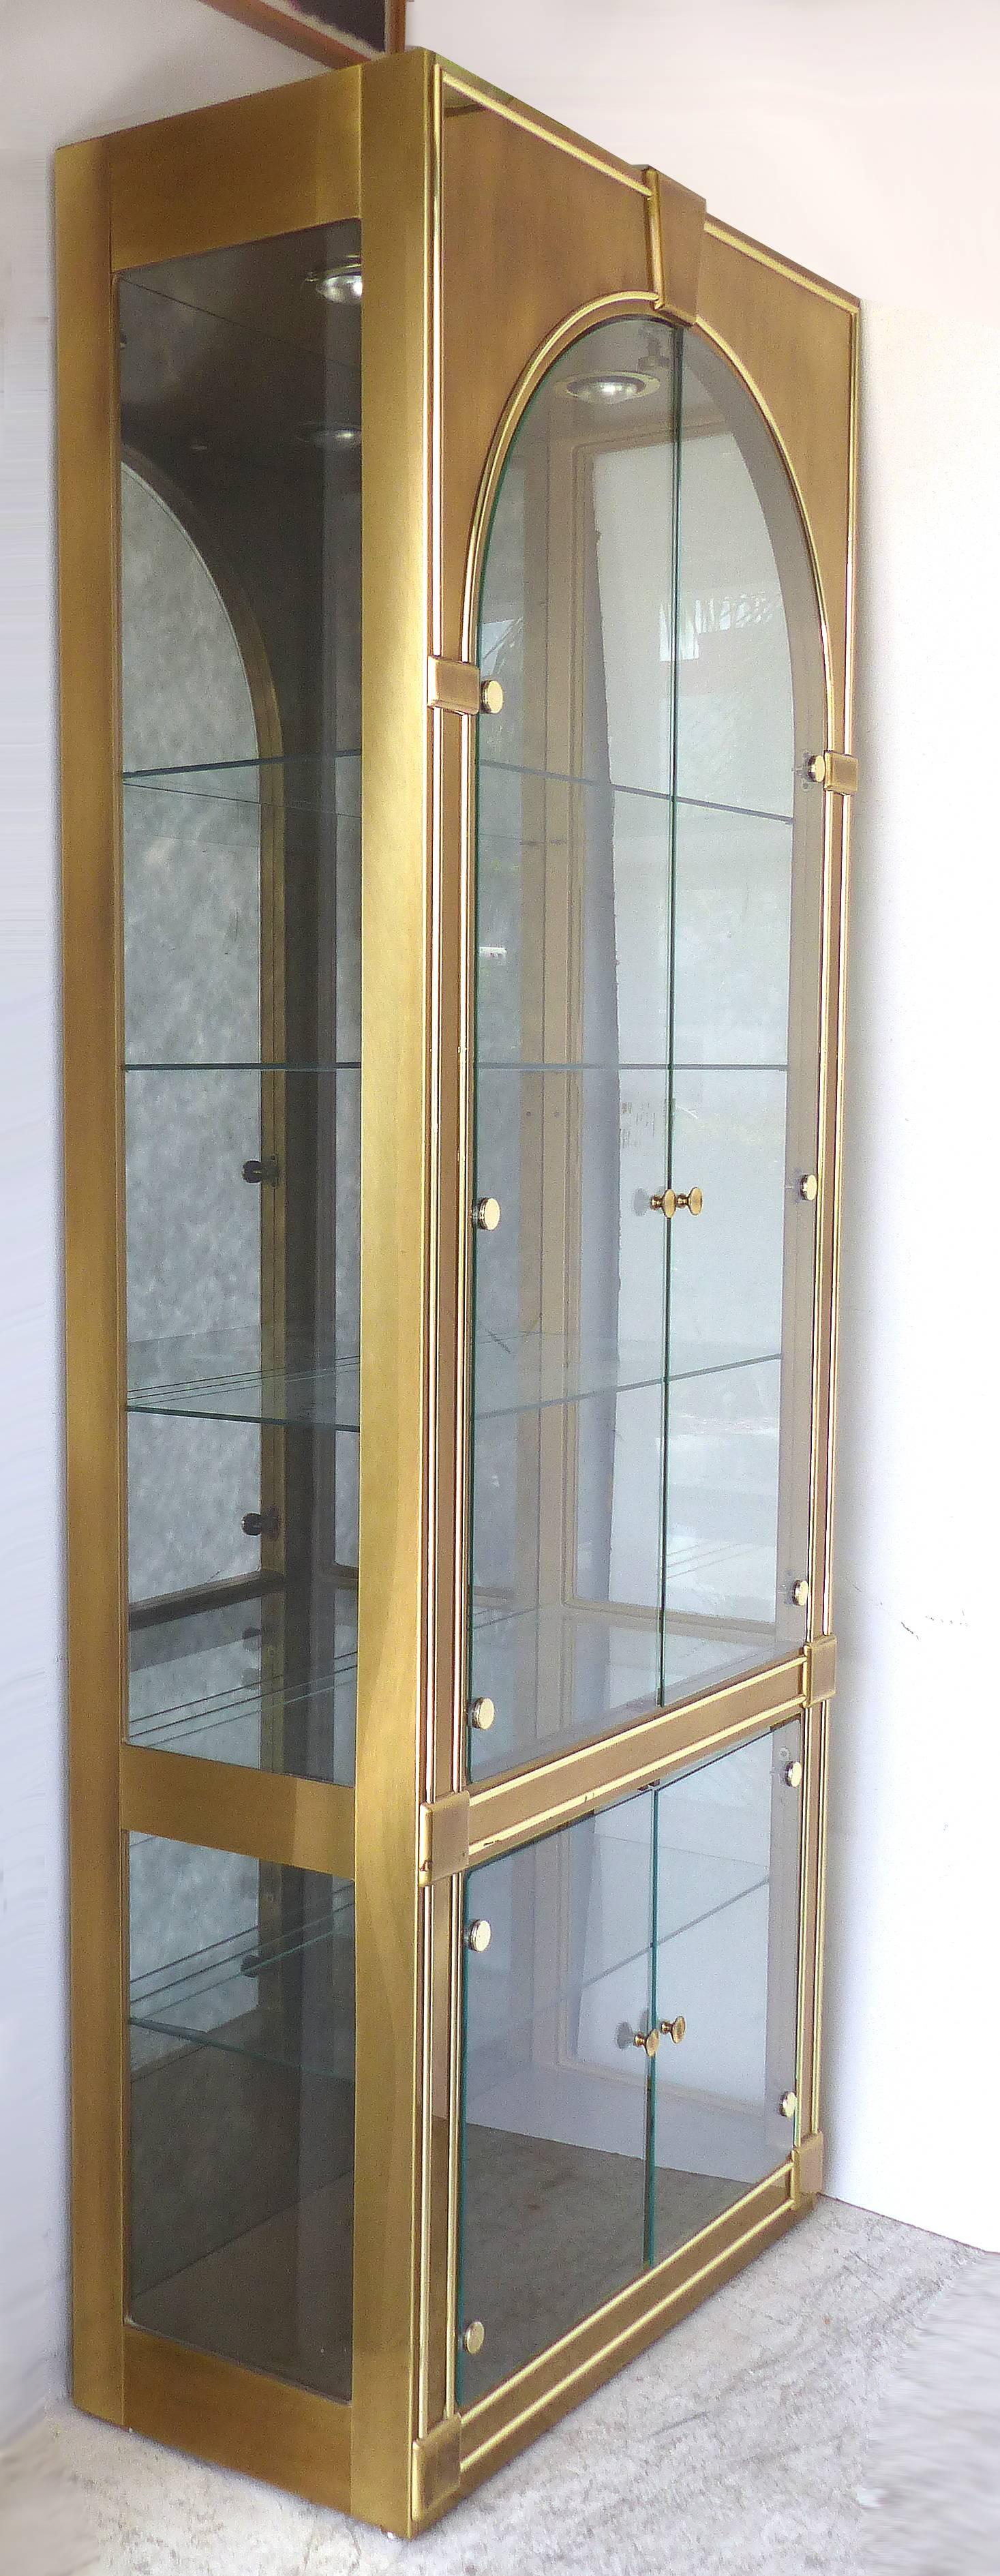 Mastercraft Furniture Brass & Glass Cabinet with Domed Glass Doors & Aged Mirror

Offered for sale is a nice Mastercraft brass and glass display cabinet with glass shelves, two domed glass and interior lights. This beautiful classically designed